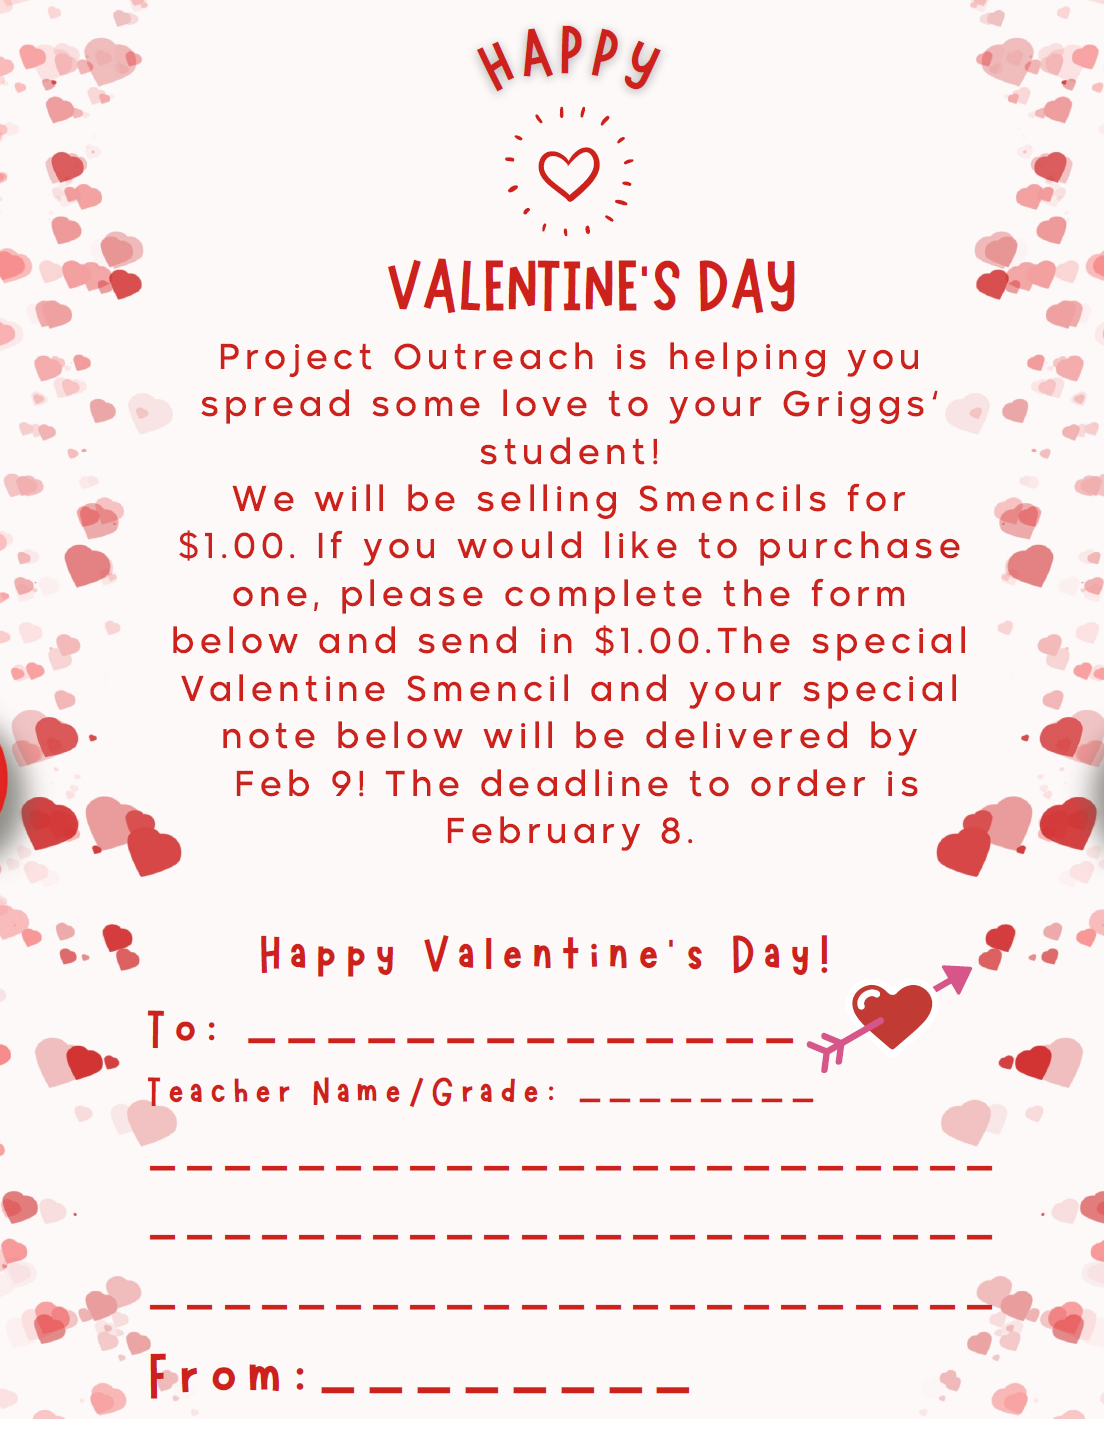 Project OutReach Valentine Smencil Fundraiser flyer in English